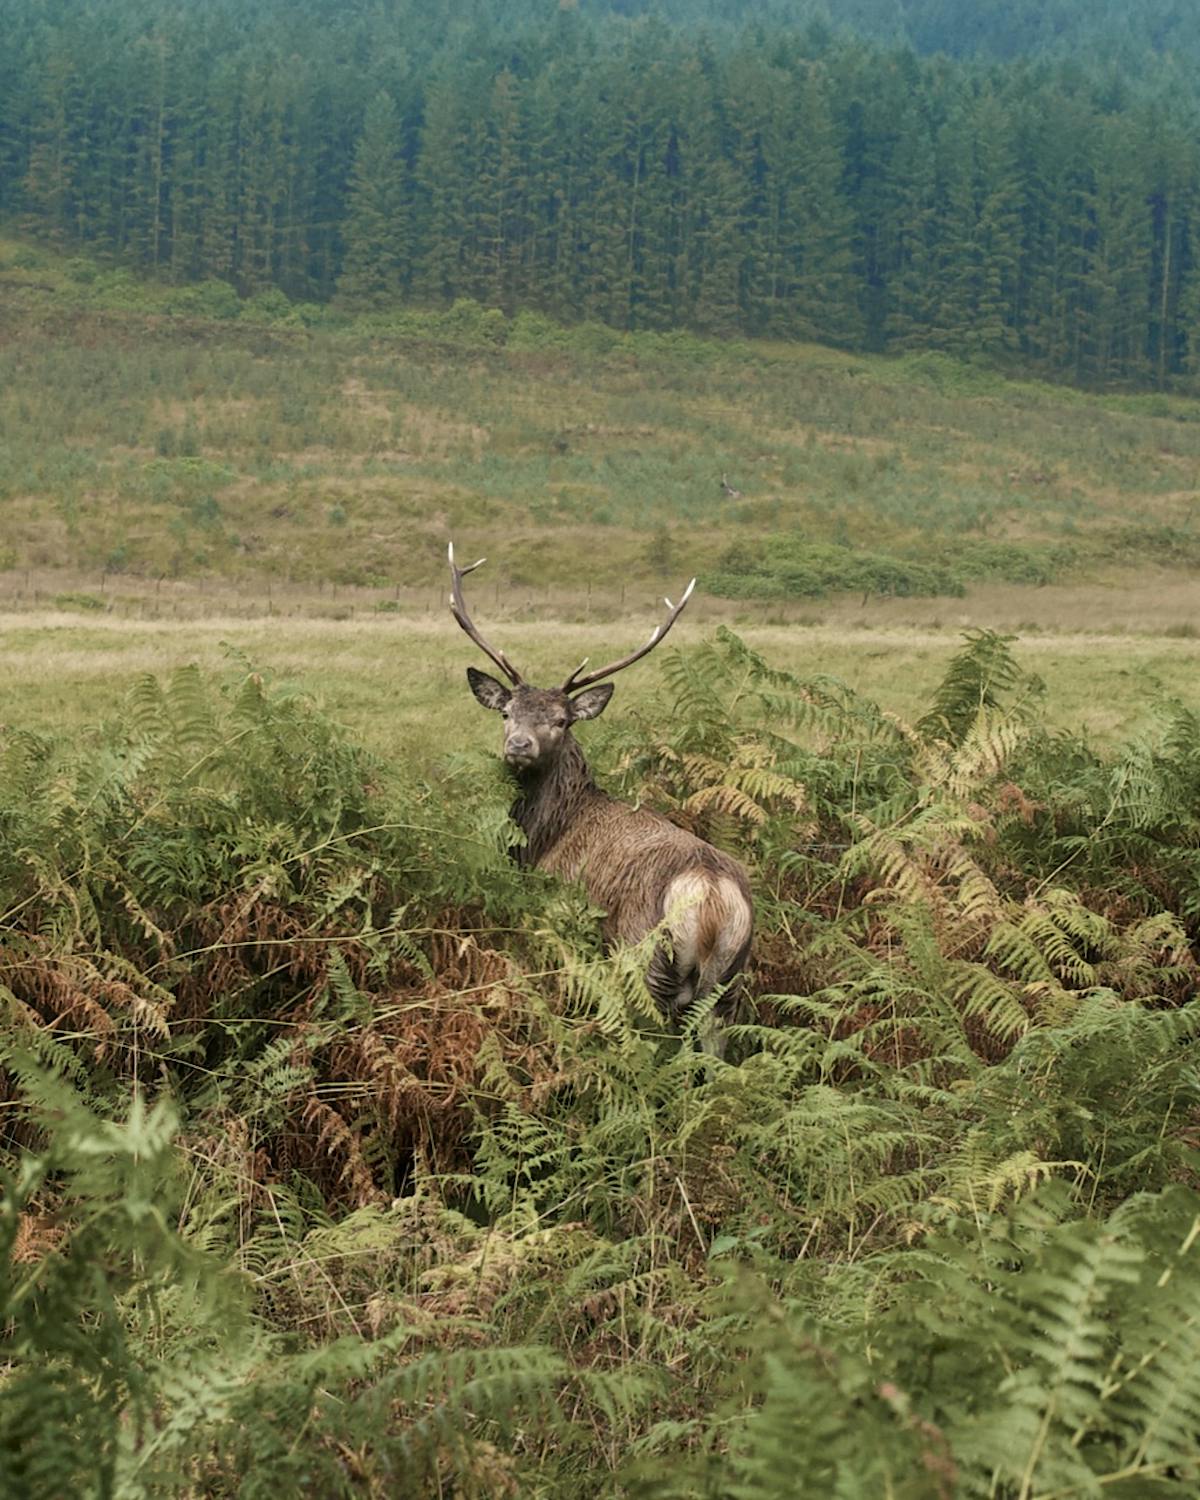 A stag standing in a glen.